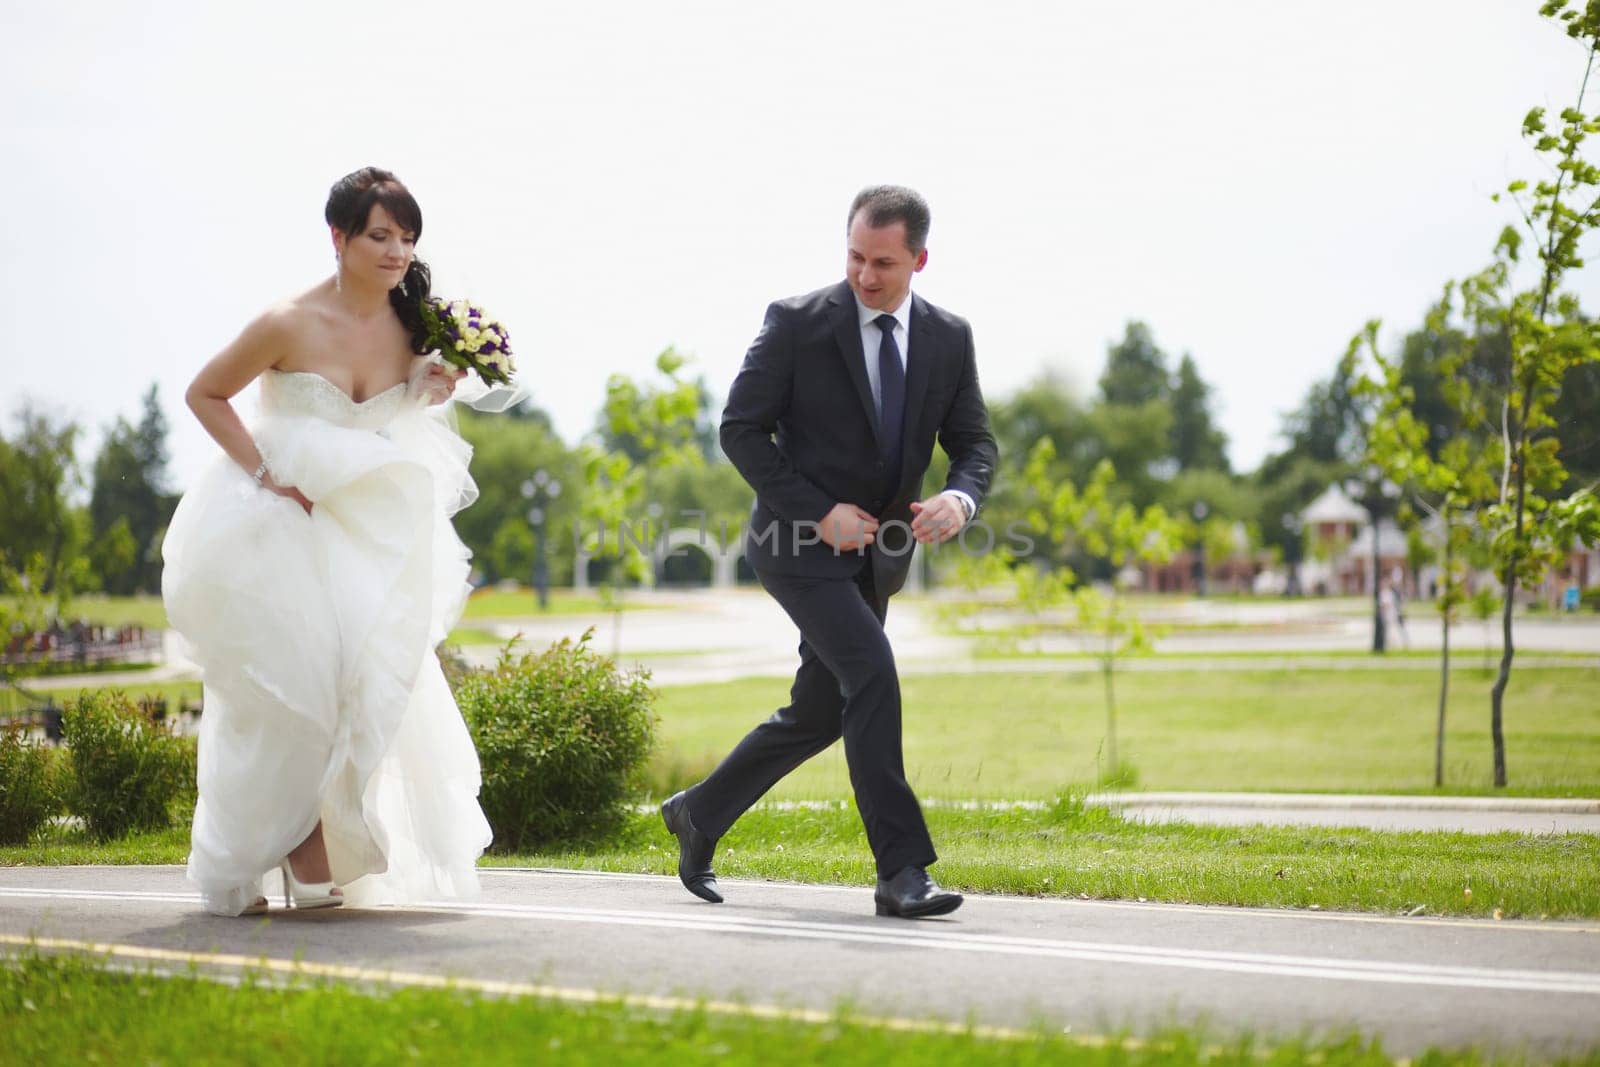 The bride and groom run along the road together by Mastak80